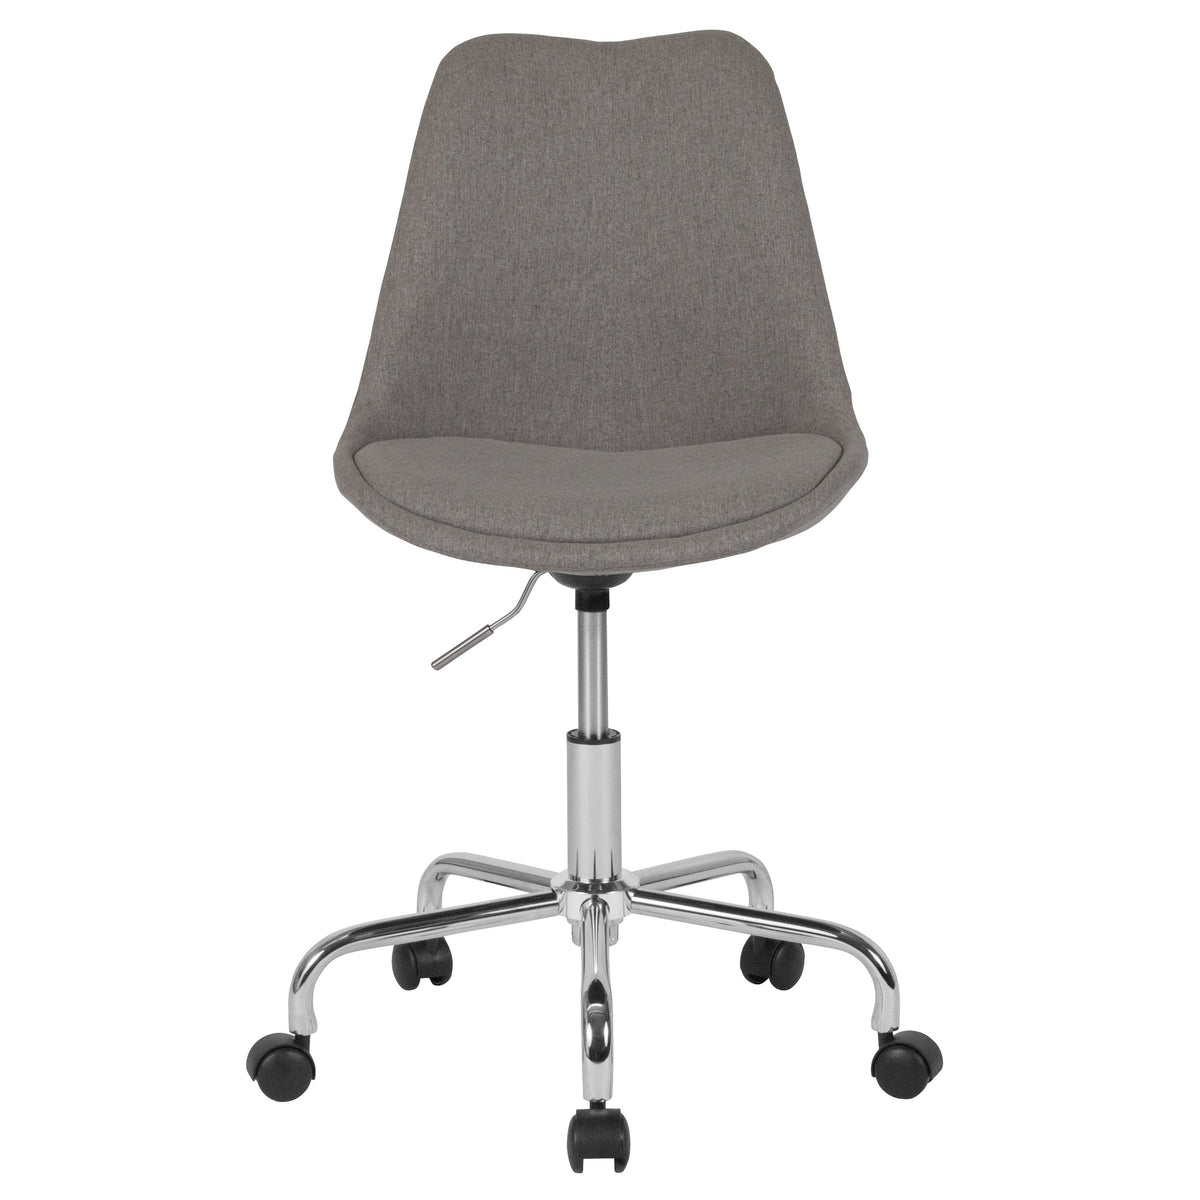 Light Gray |#| Mid-Back Light Gray Fabric Task Office Chair with Pneumatic Lift and Chrome Base